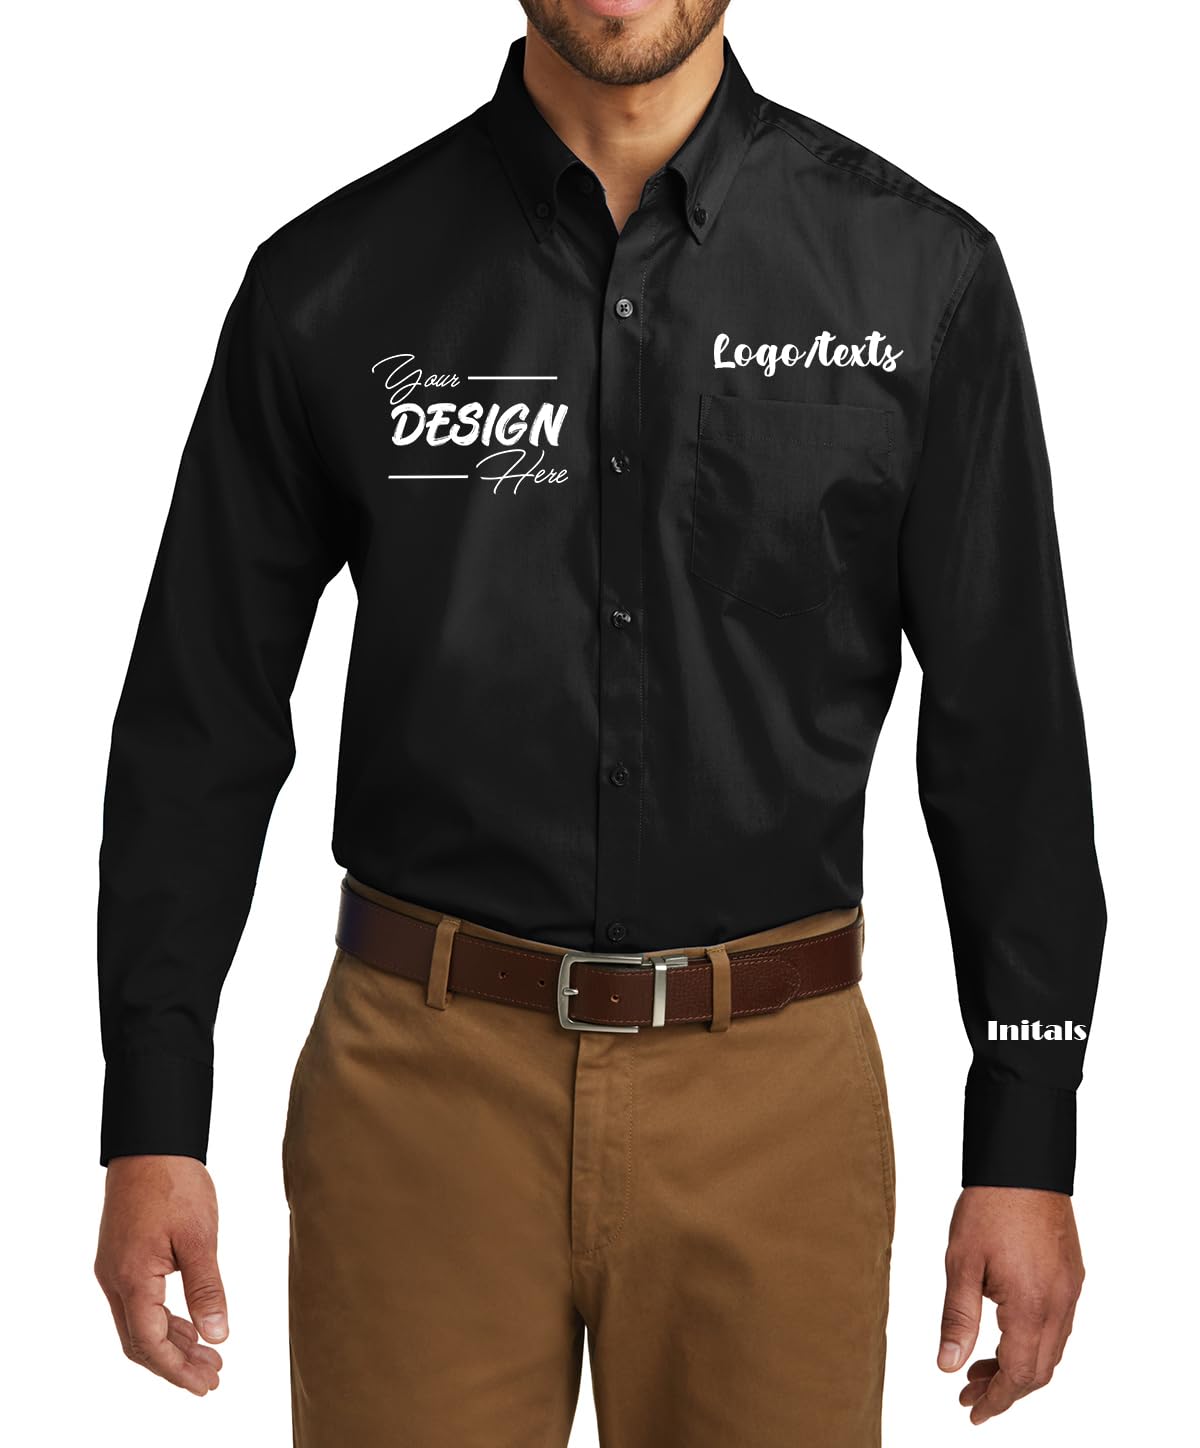 INK STITCH Men W100 Custom Personalized Embroidery Add Logo Texts Easy Care Long Sleeve Dress Buttondown Shirts